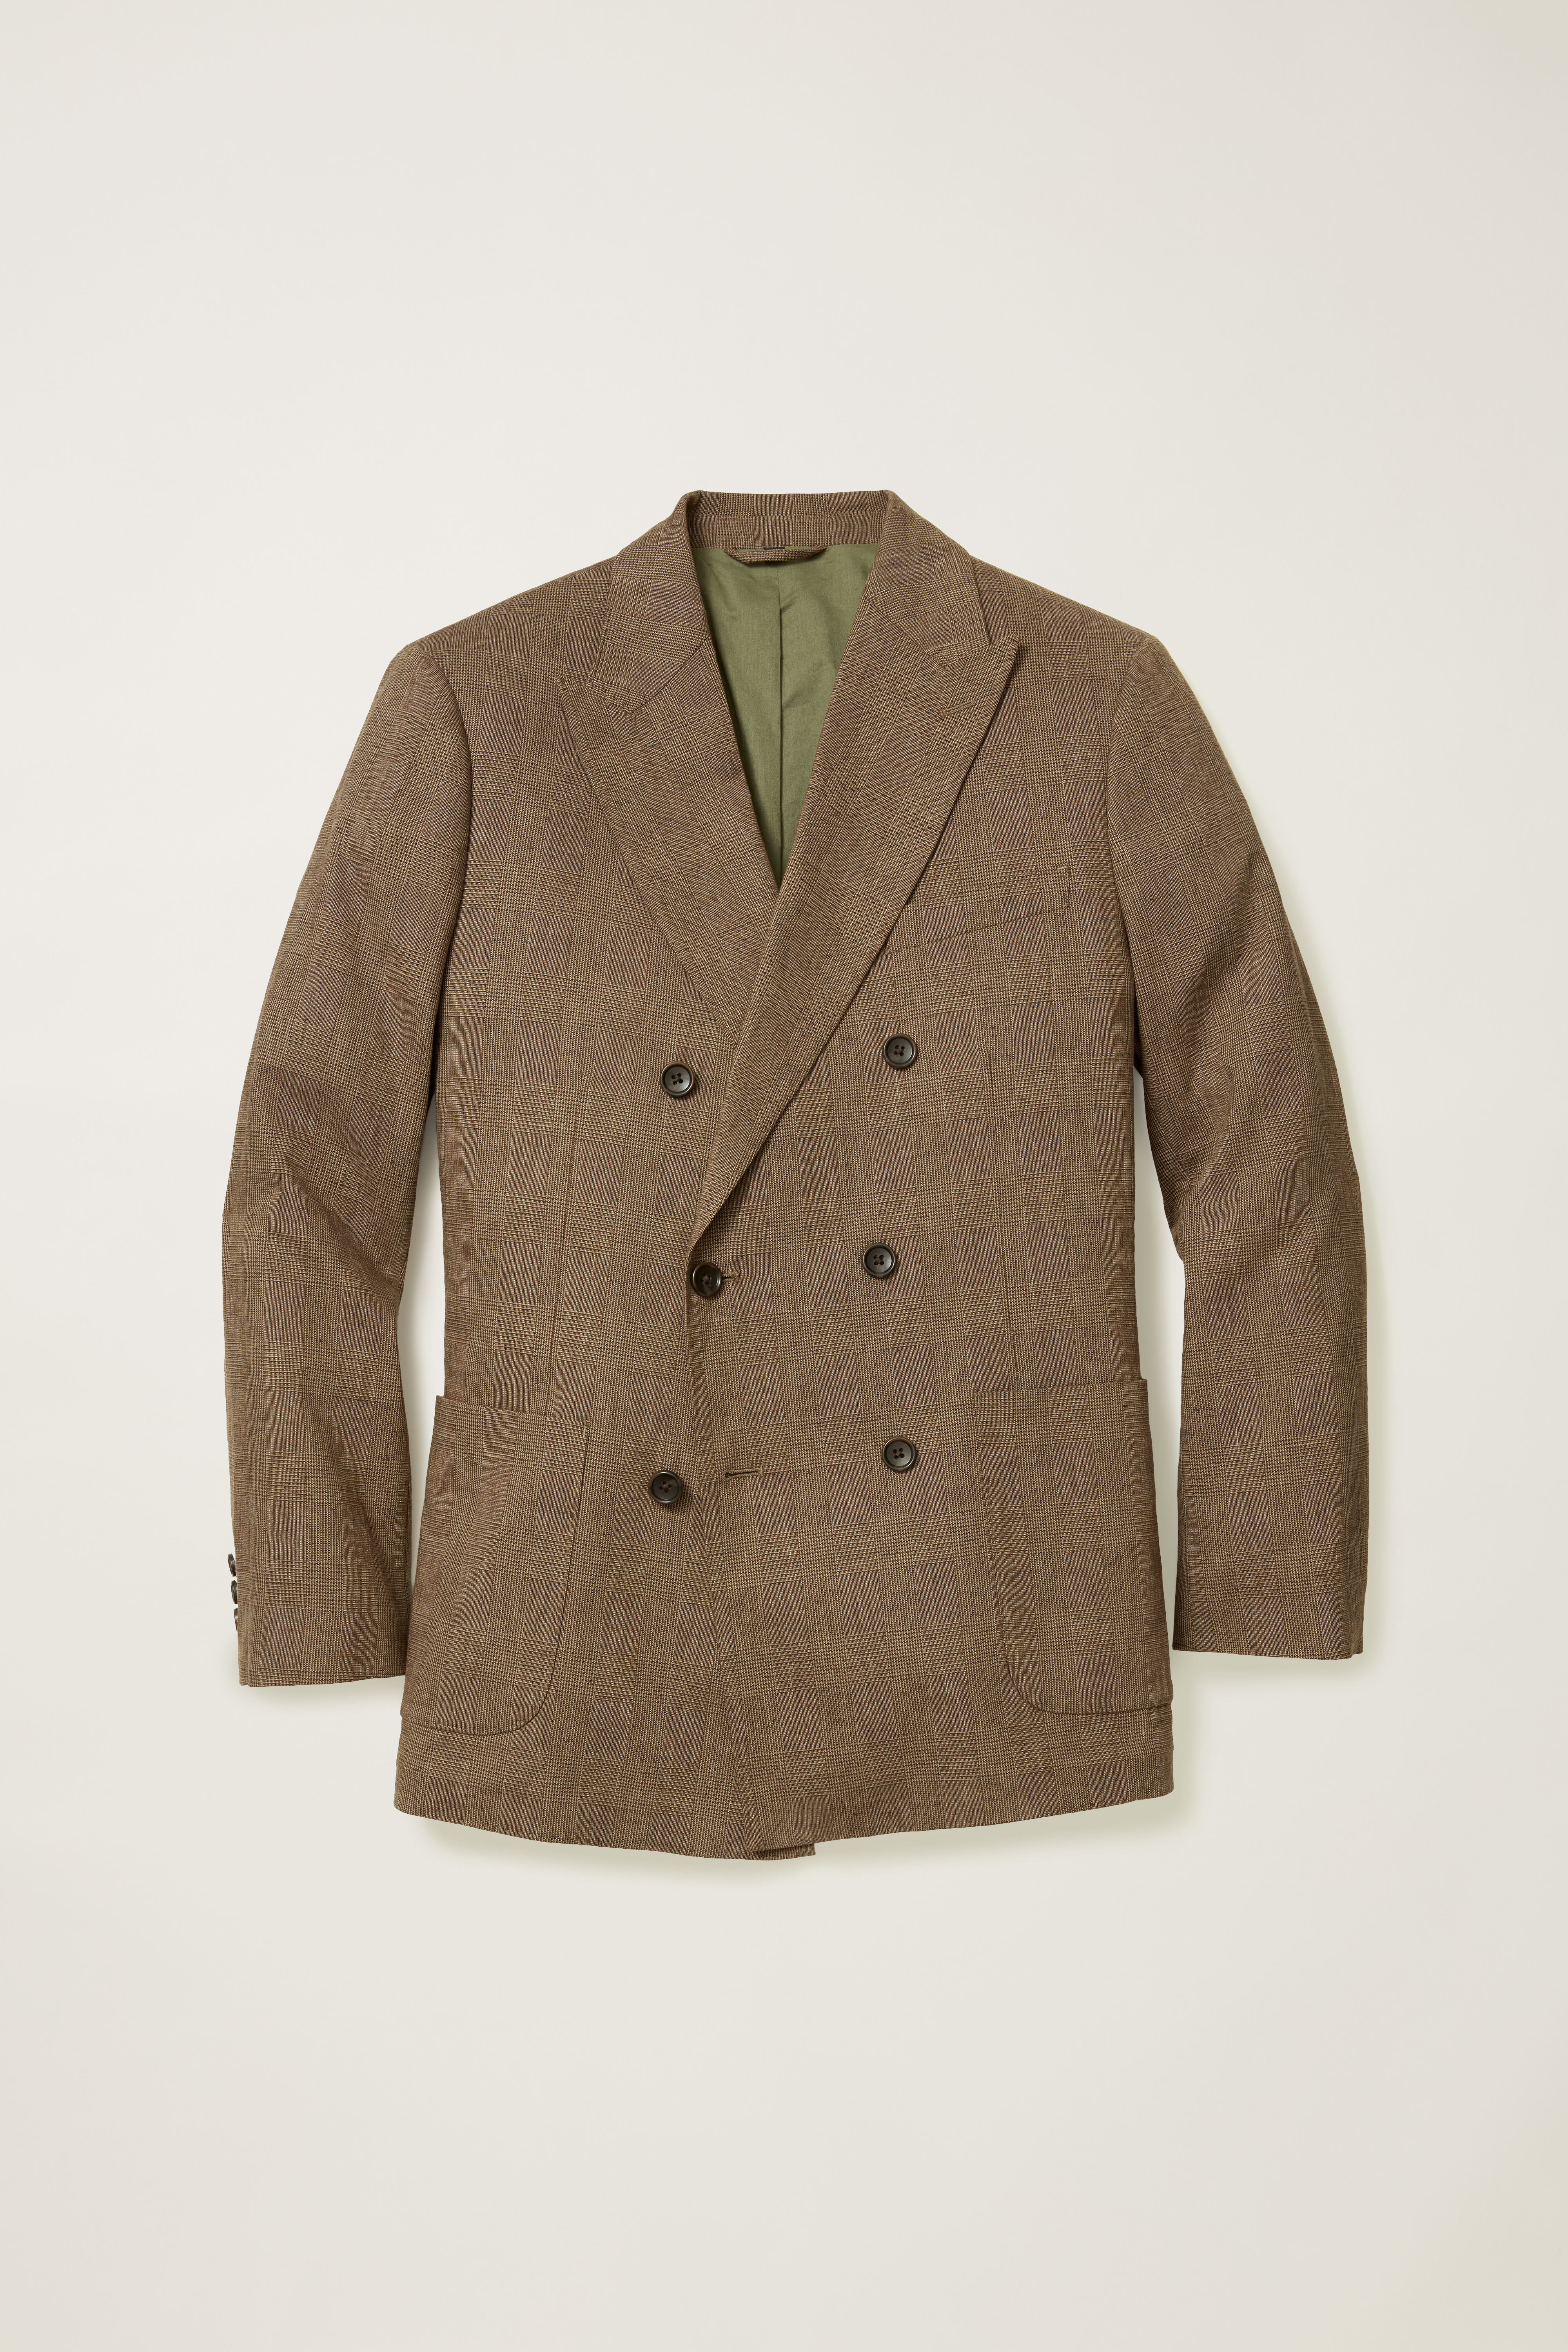 Jetsetter Unconstructed Double Breasted Blazer